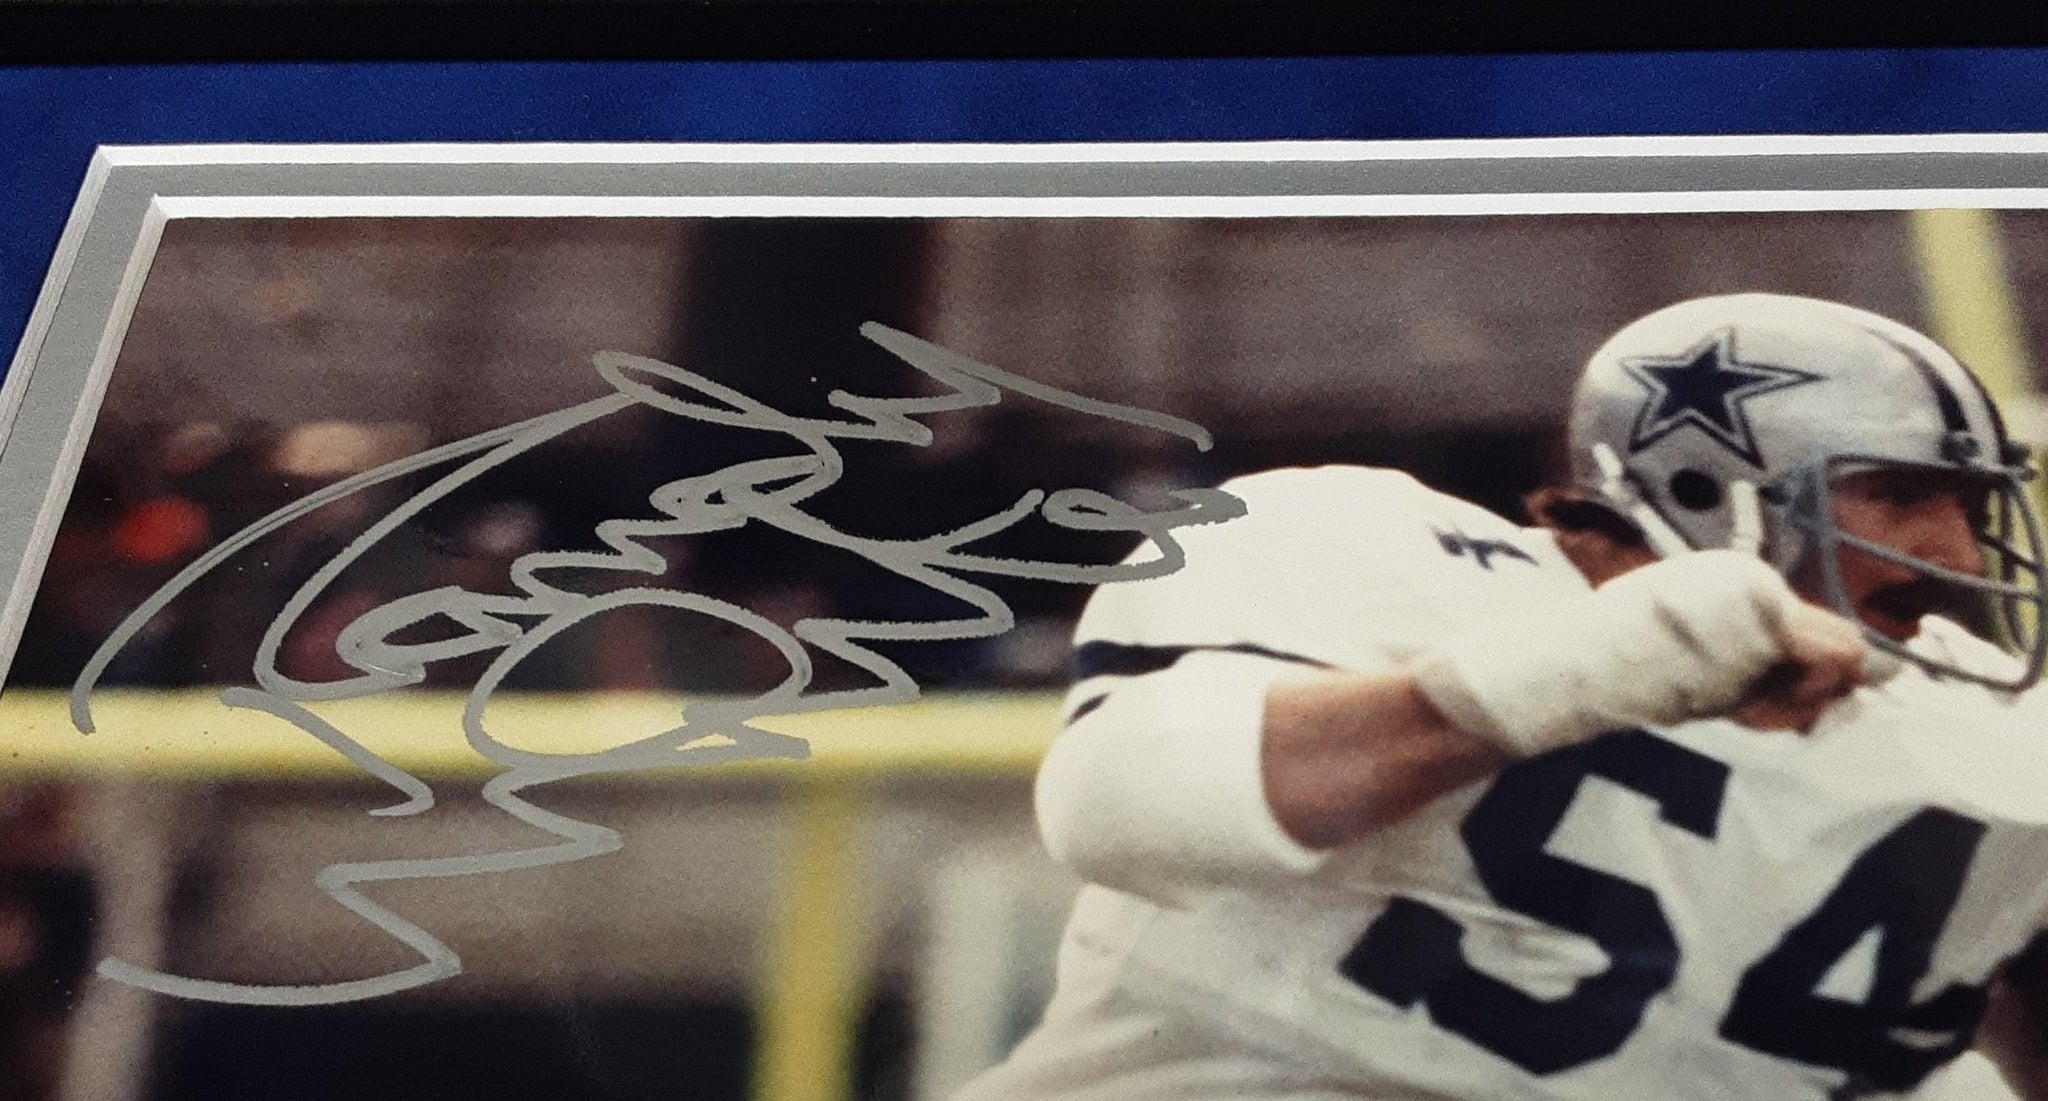 Randy White Authentic Signed Framed 8x10 Photo Autographed PSA